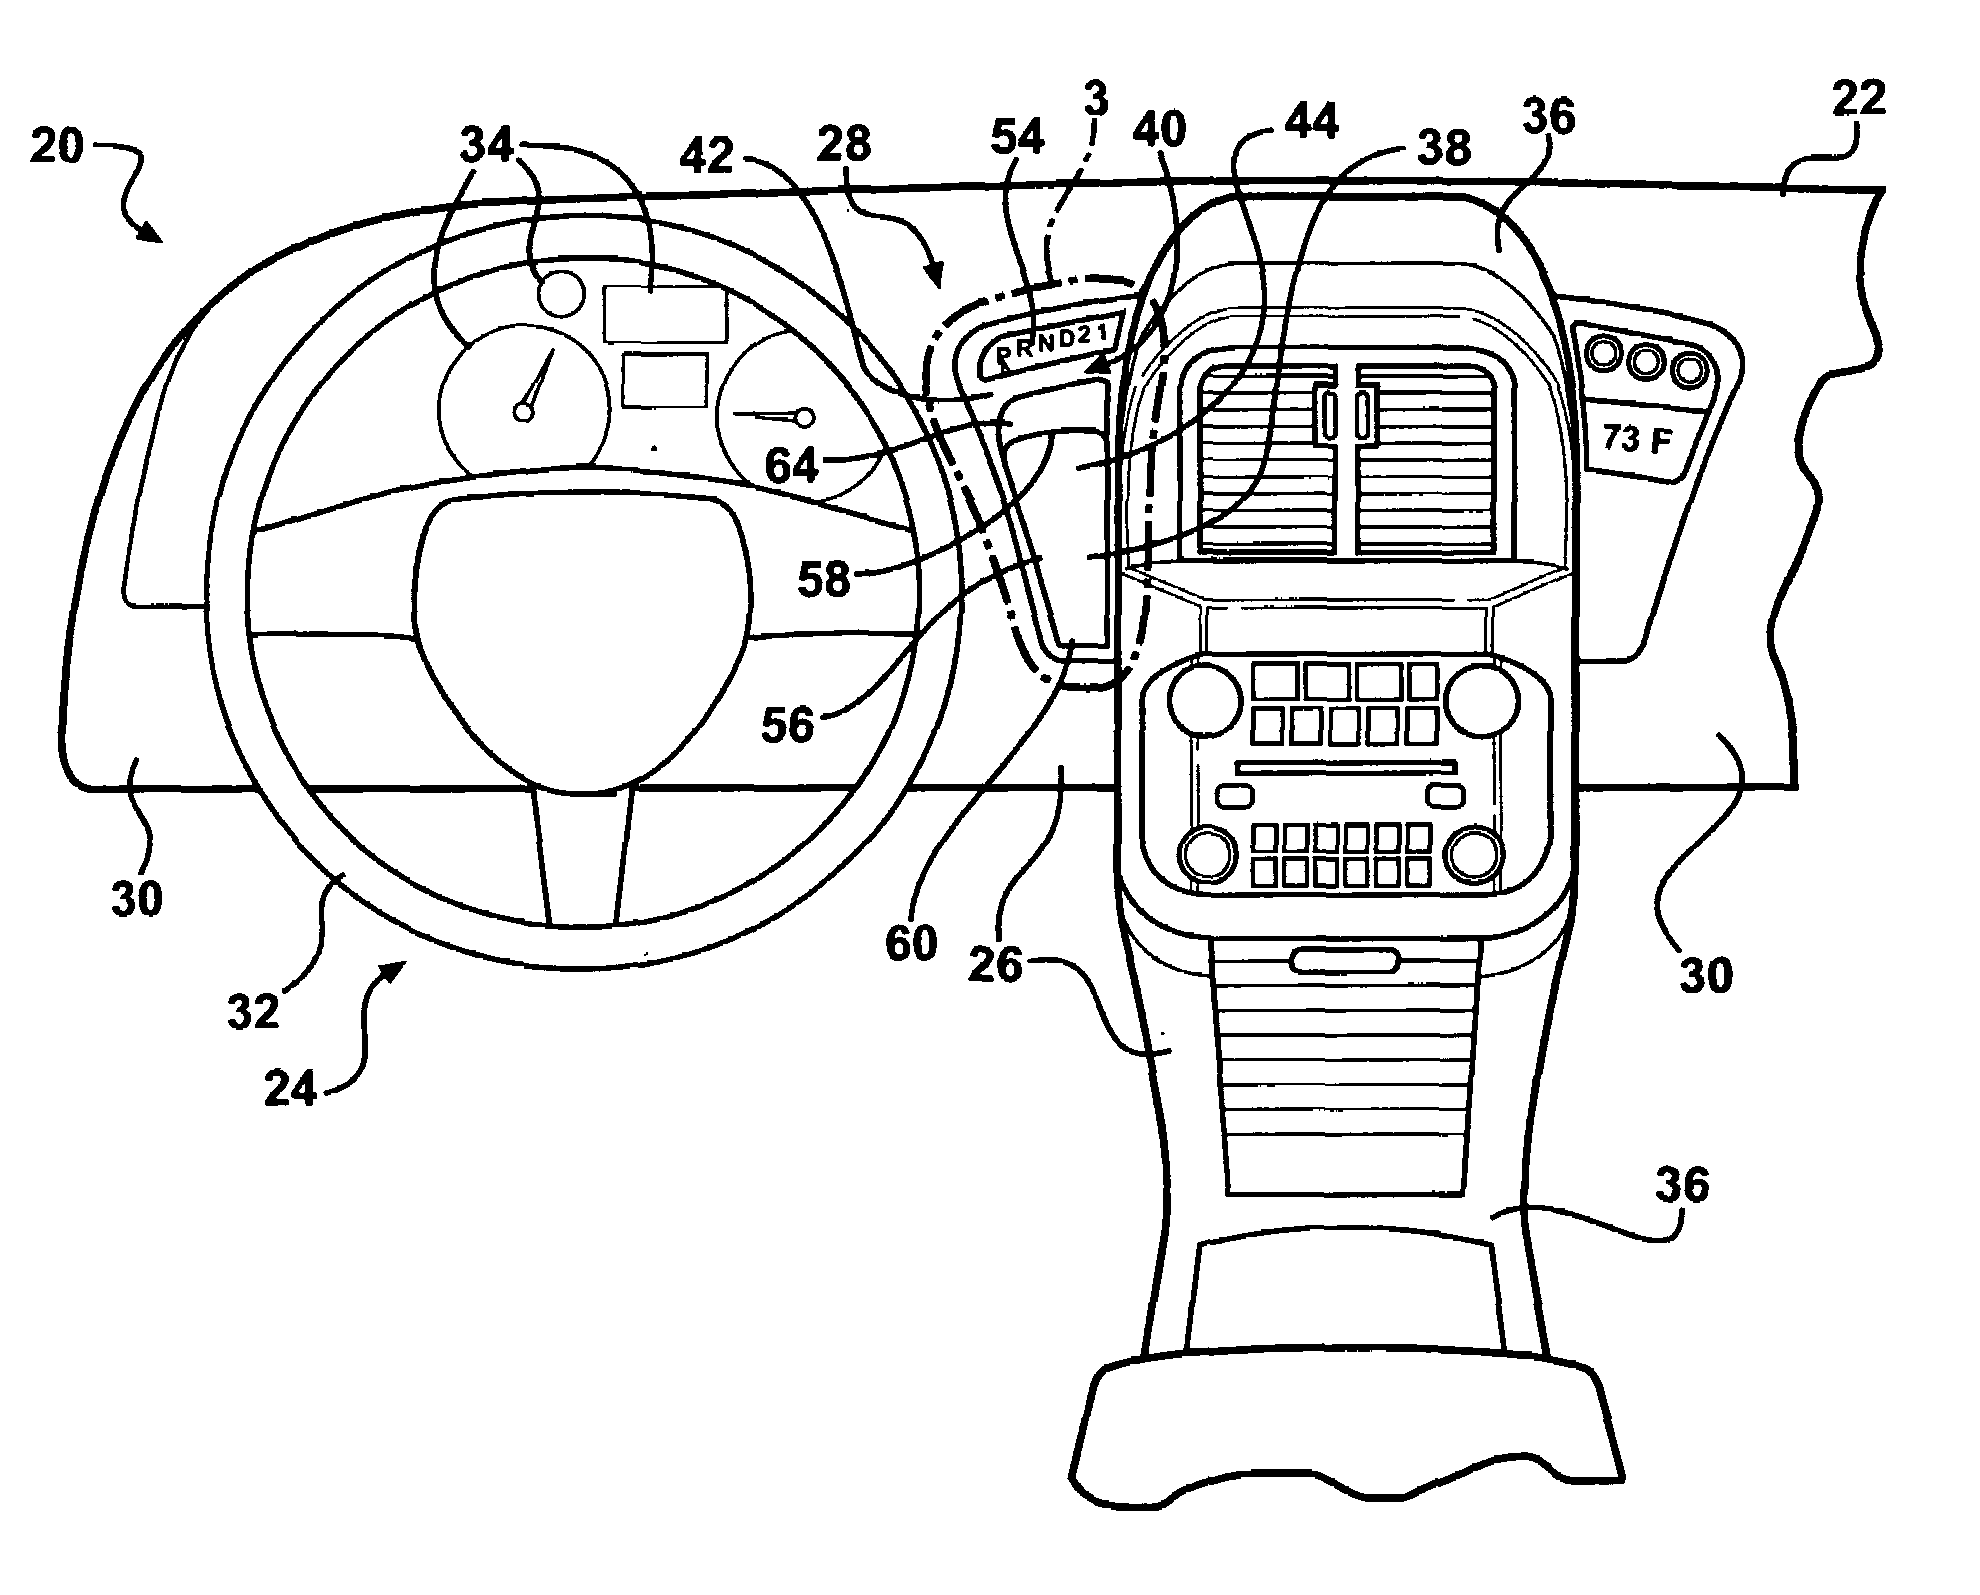 Instrument panel assembly for a vehicle